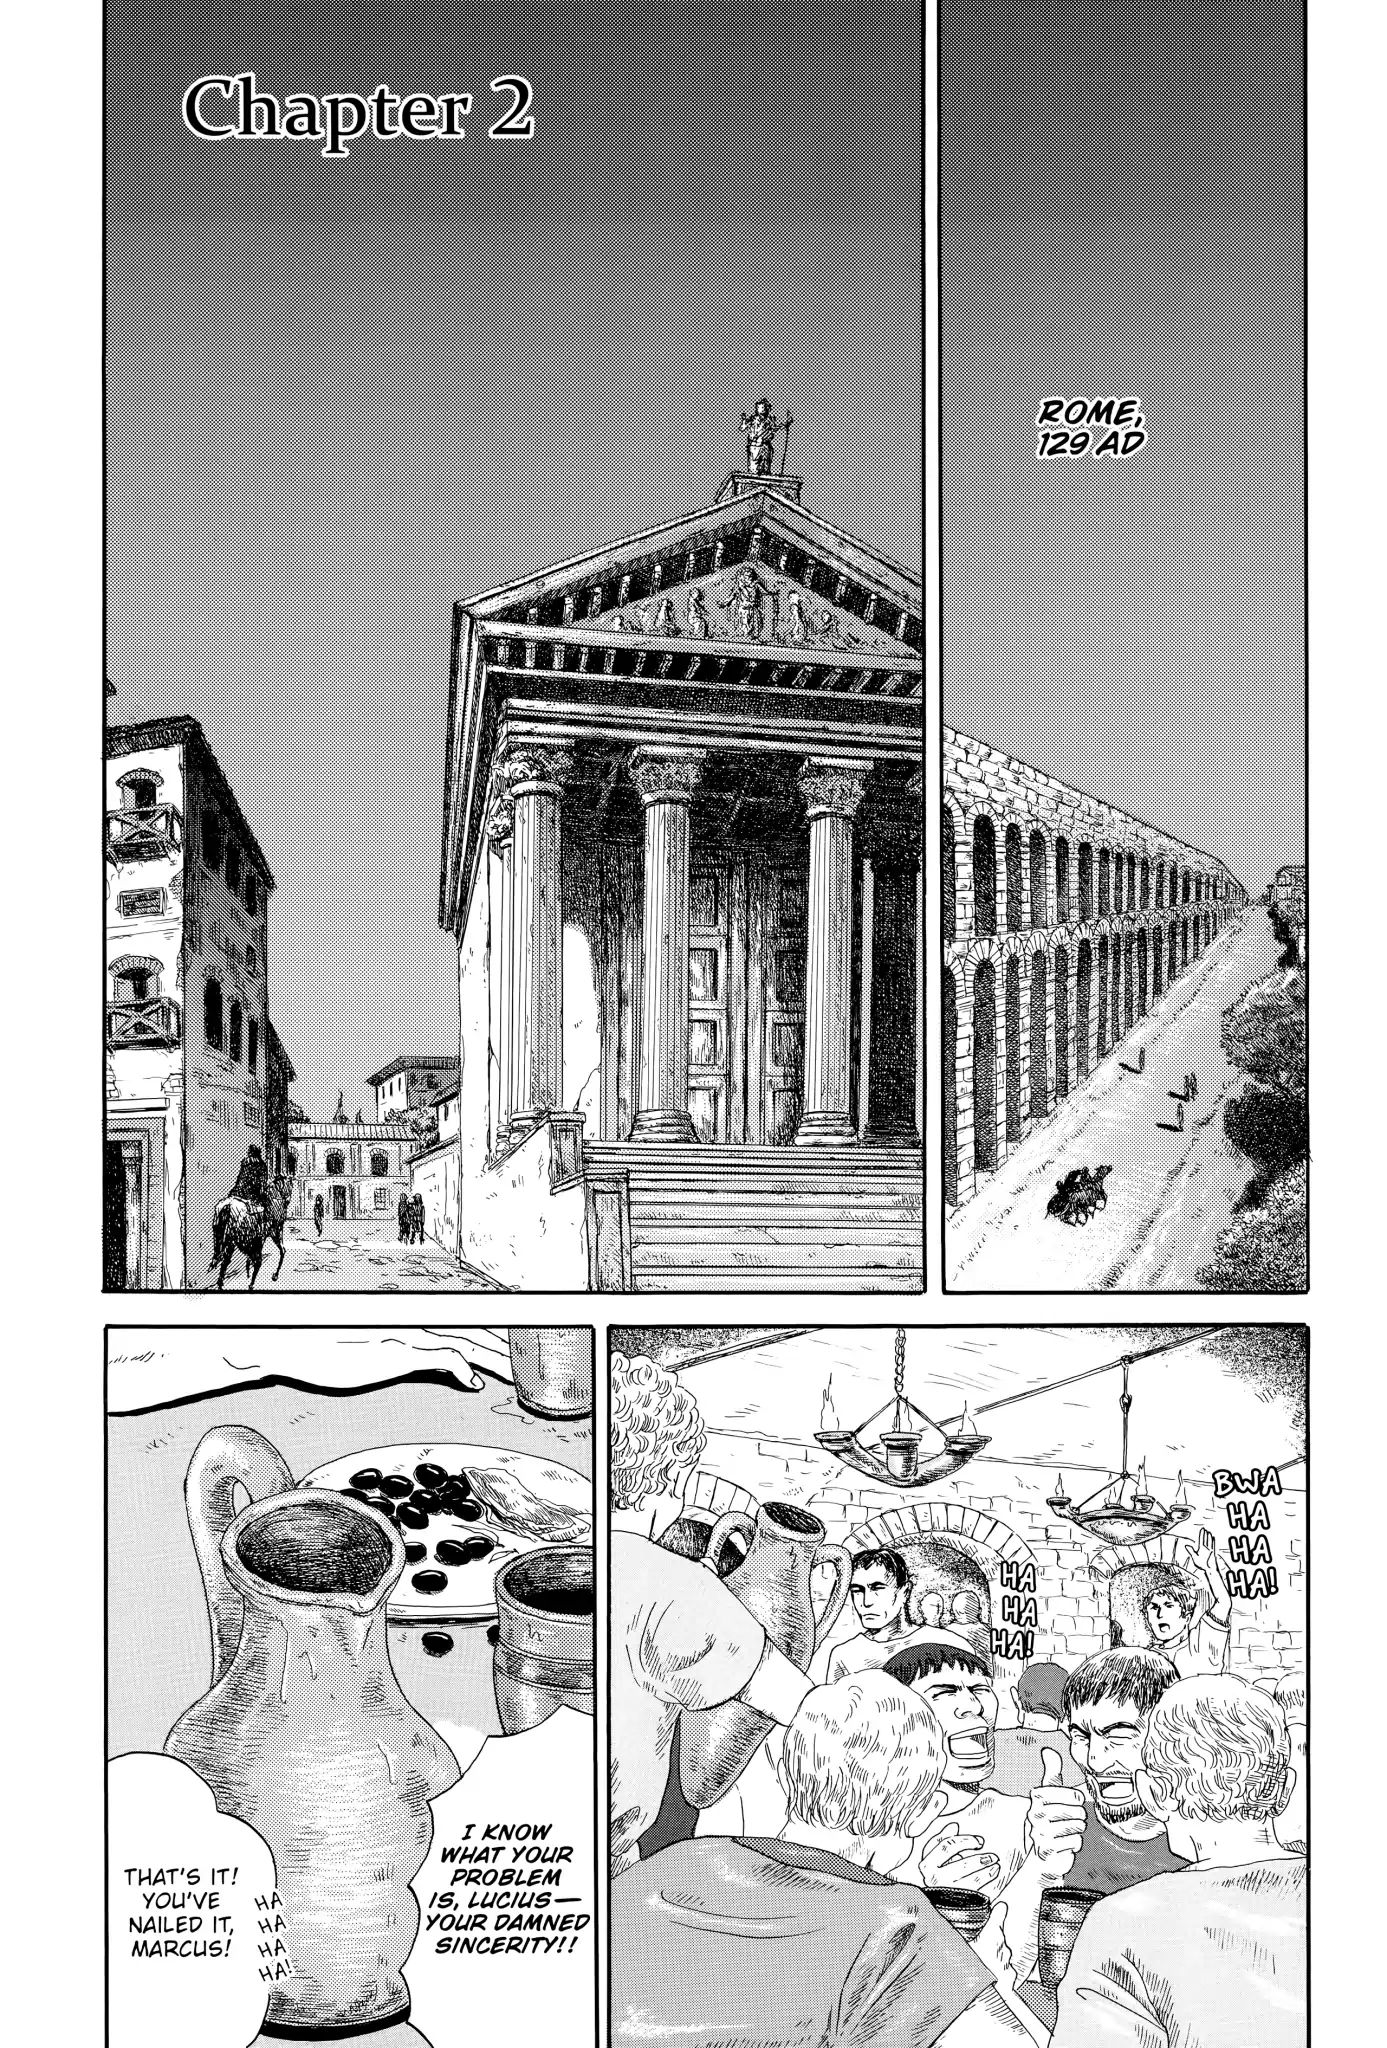 Thermae Romae Chapter 2 #1